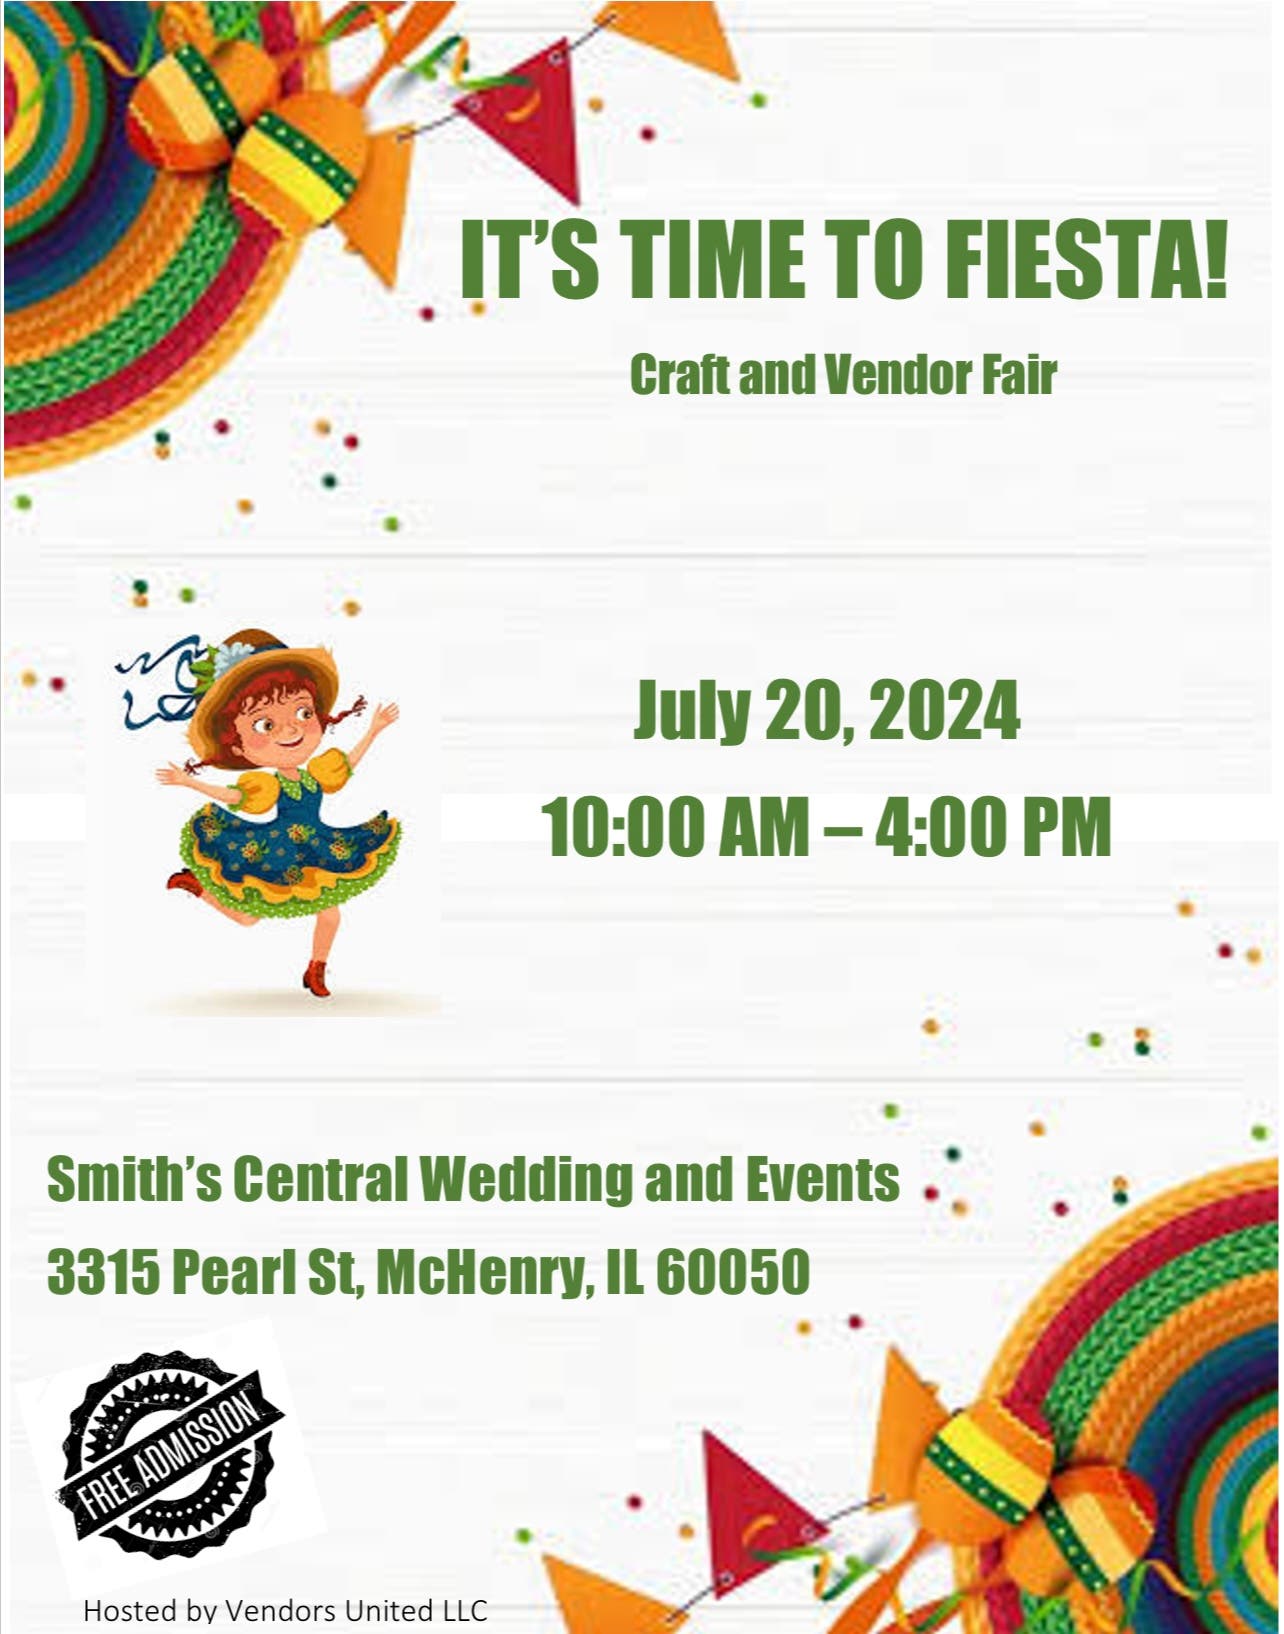 It’s Time to Fiesta Craft and Vendor Fair